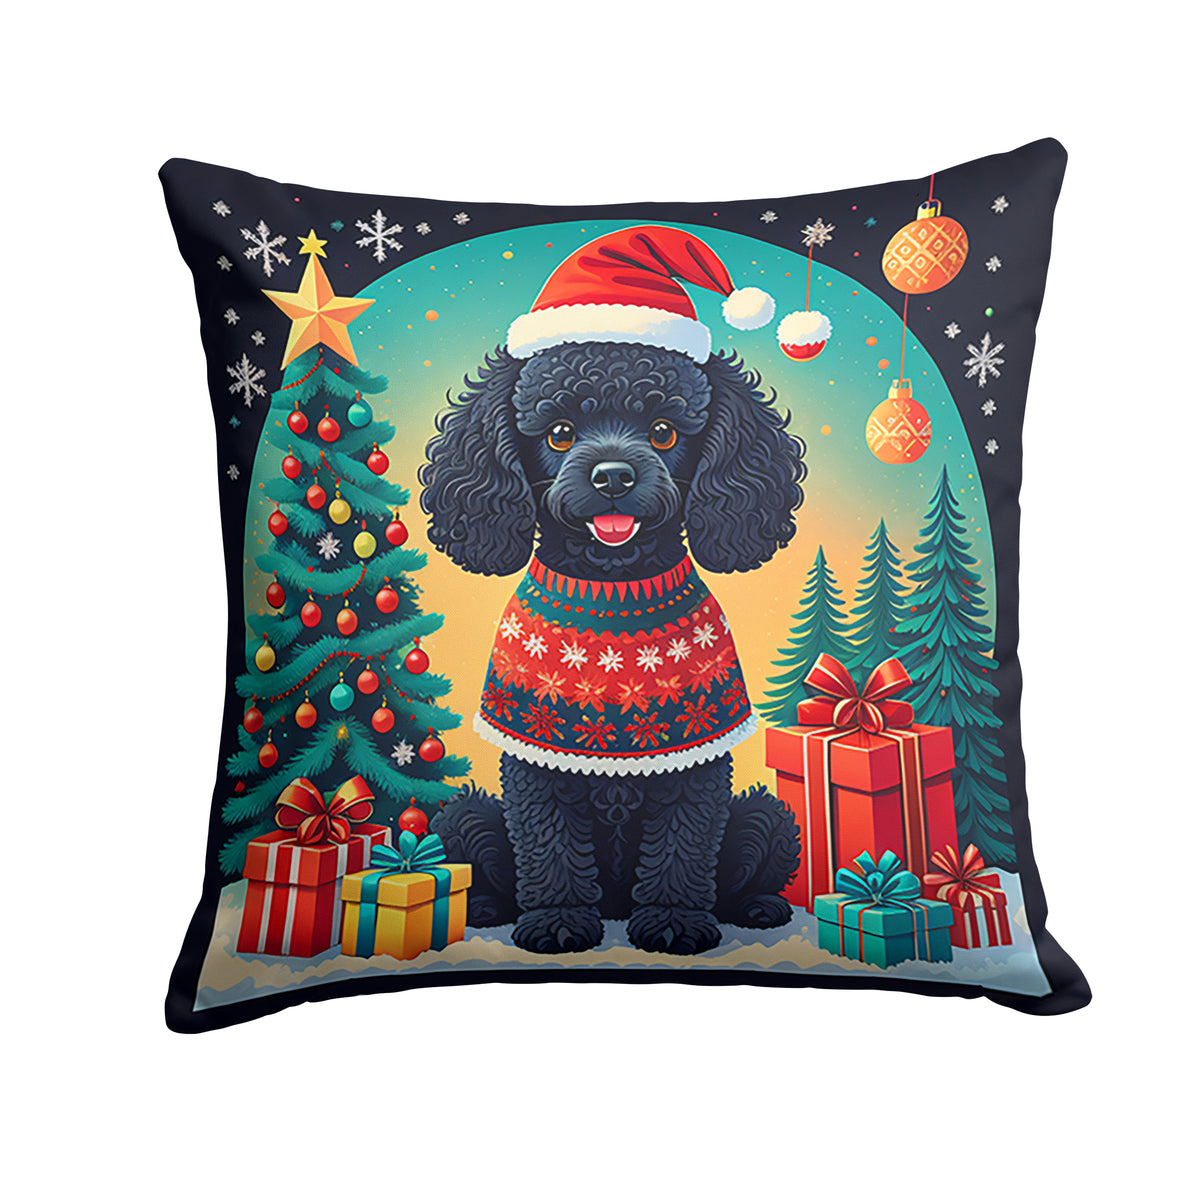 Buy this Black Toy Poodle Christmas Fabric Decorative Pillow